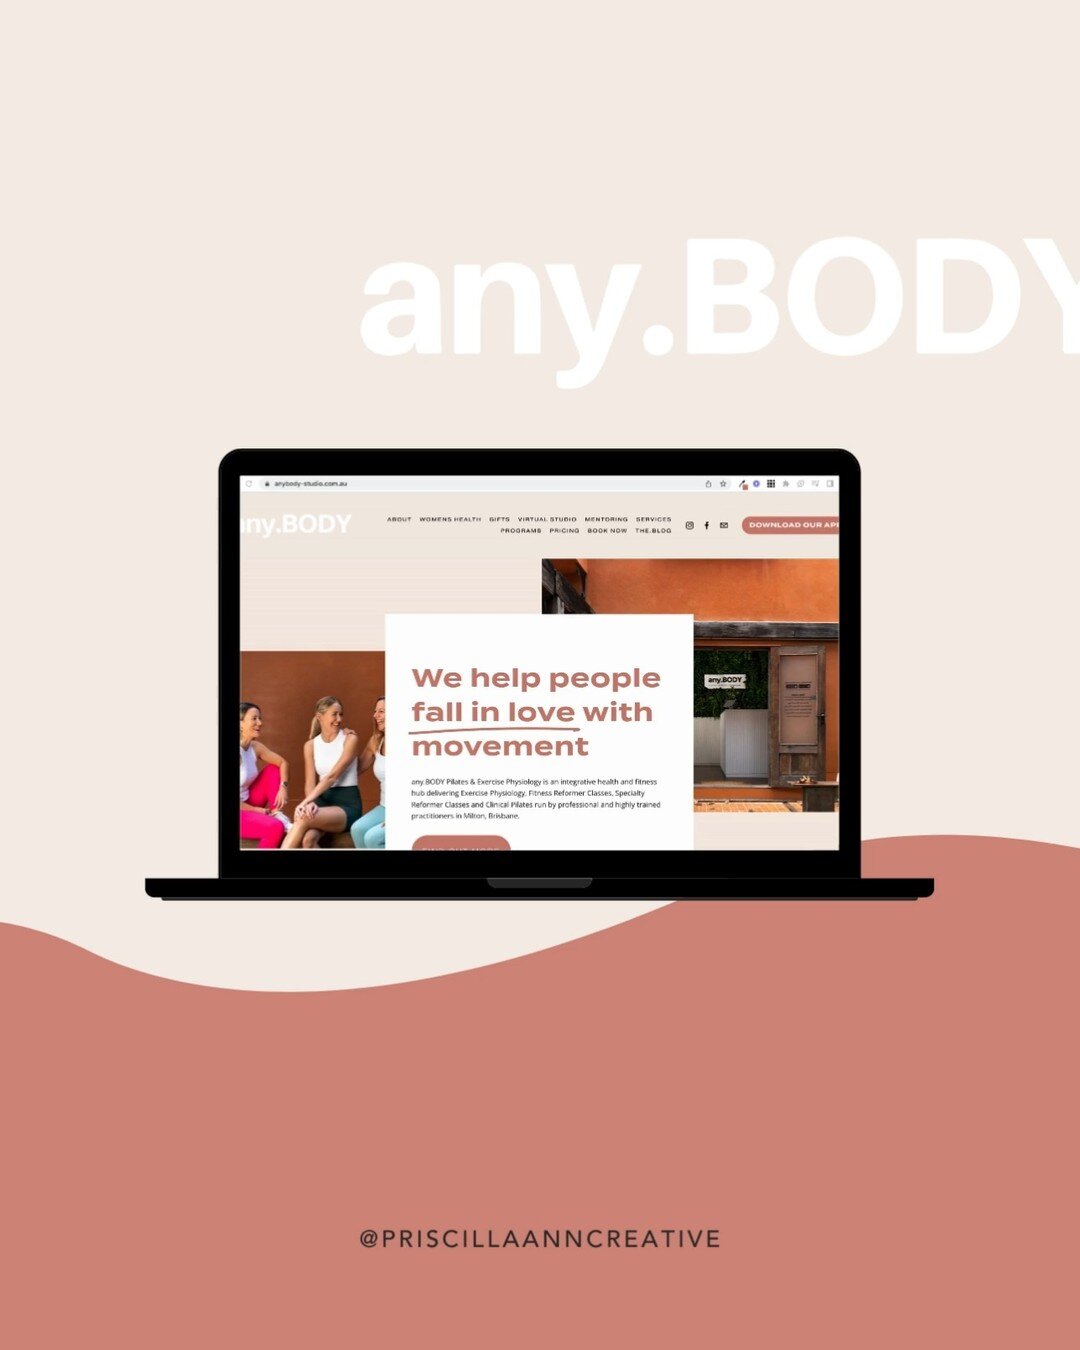 Website REFRESH! 💫 We recently worked with our client&nbsp;@any.bodystudio&nbsp;to re-fresh their website we built earlier last year.

Like all businesses, we grow and evolve and it's important to make sure our website grows and evolves with us.

@a